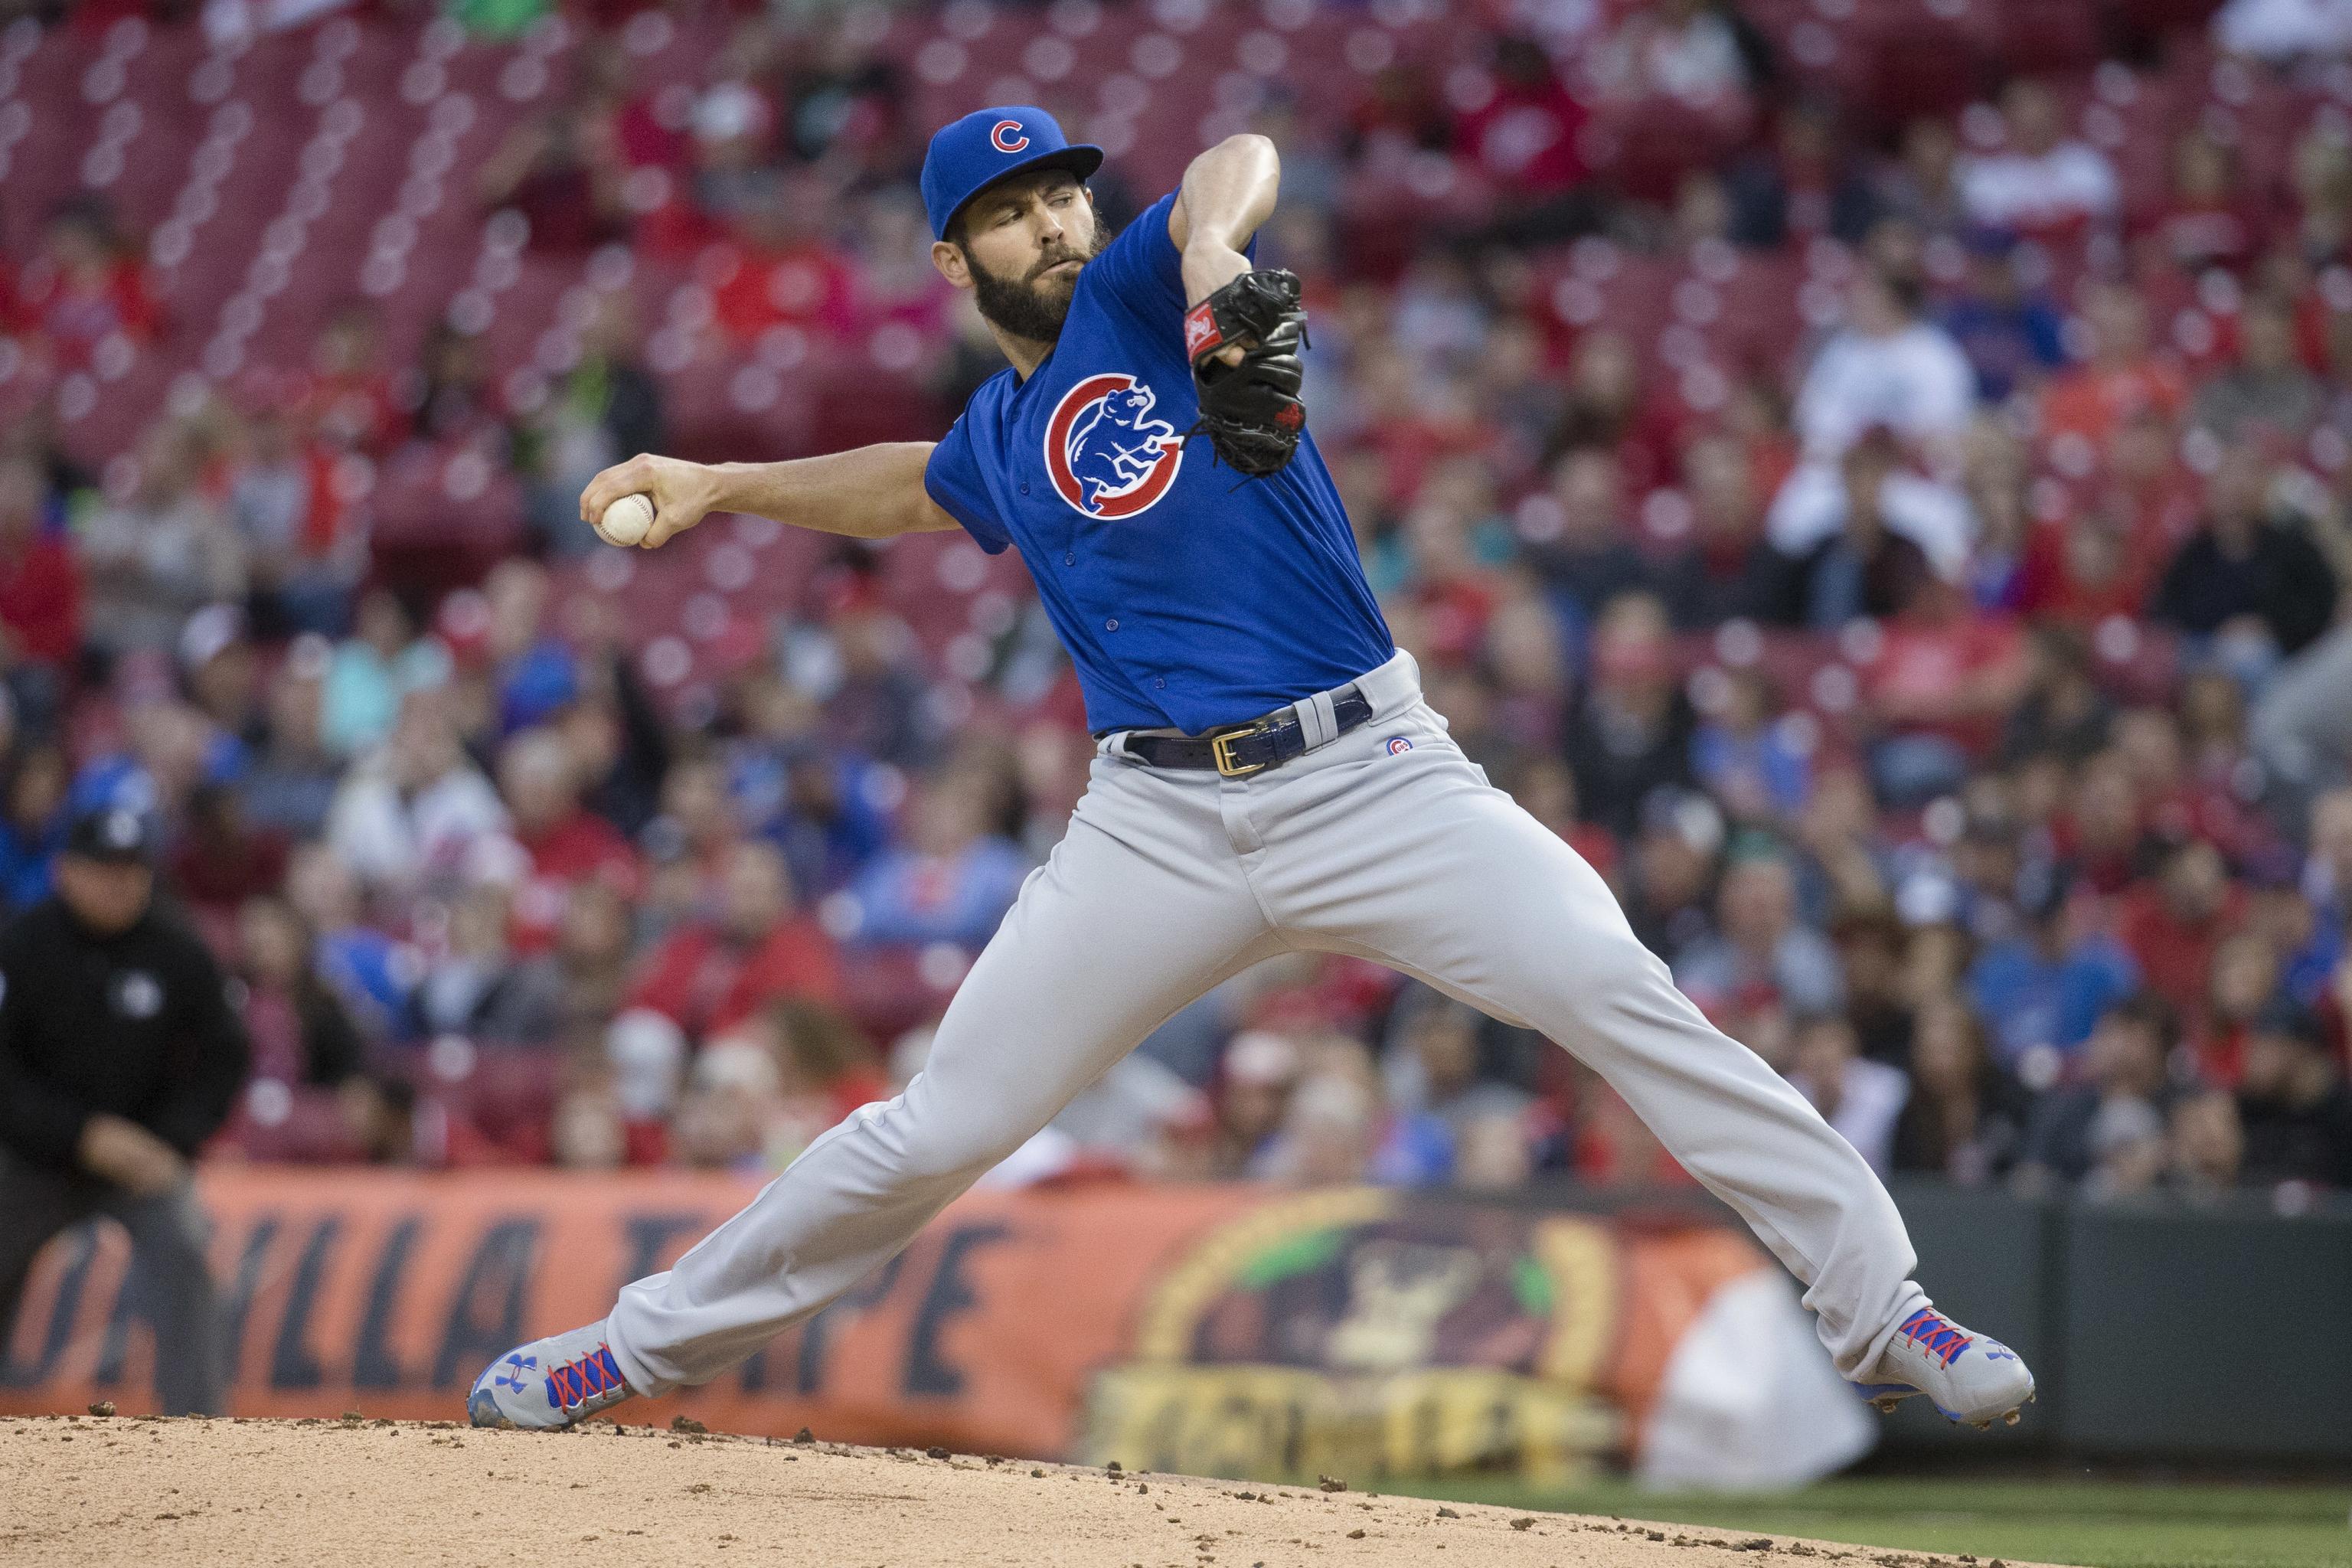 Jake Arrieta Throws No-Hitter vs. Reds: Stats, Highlights and